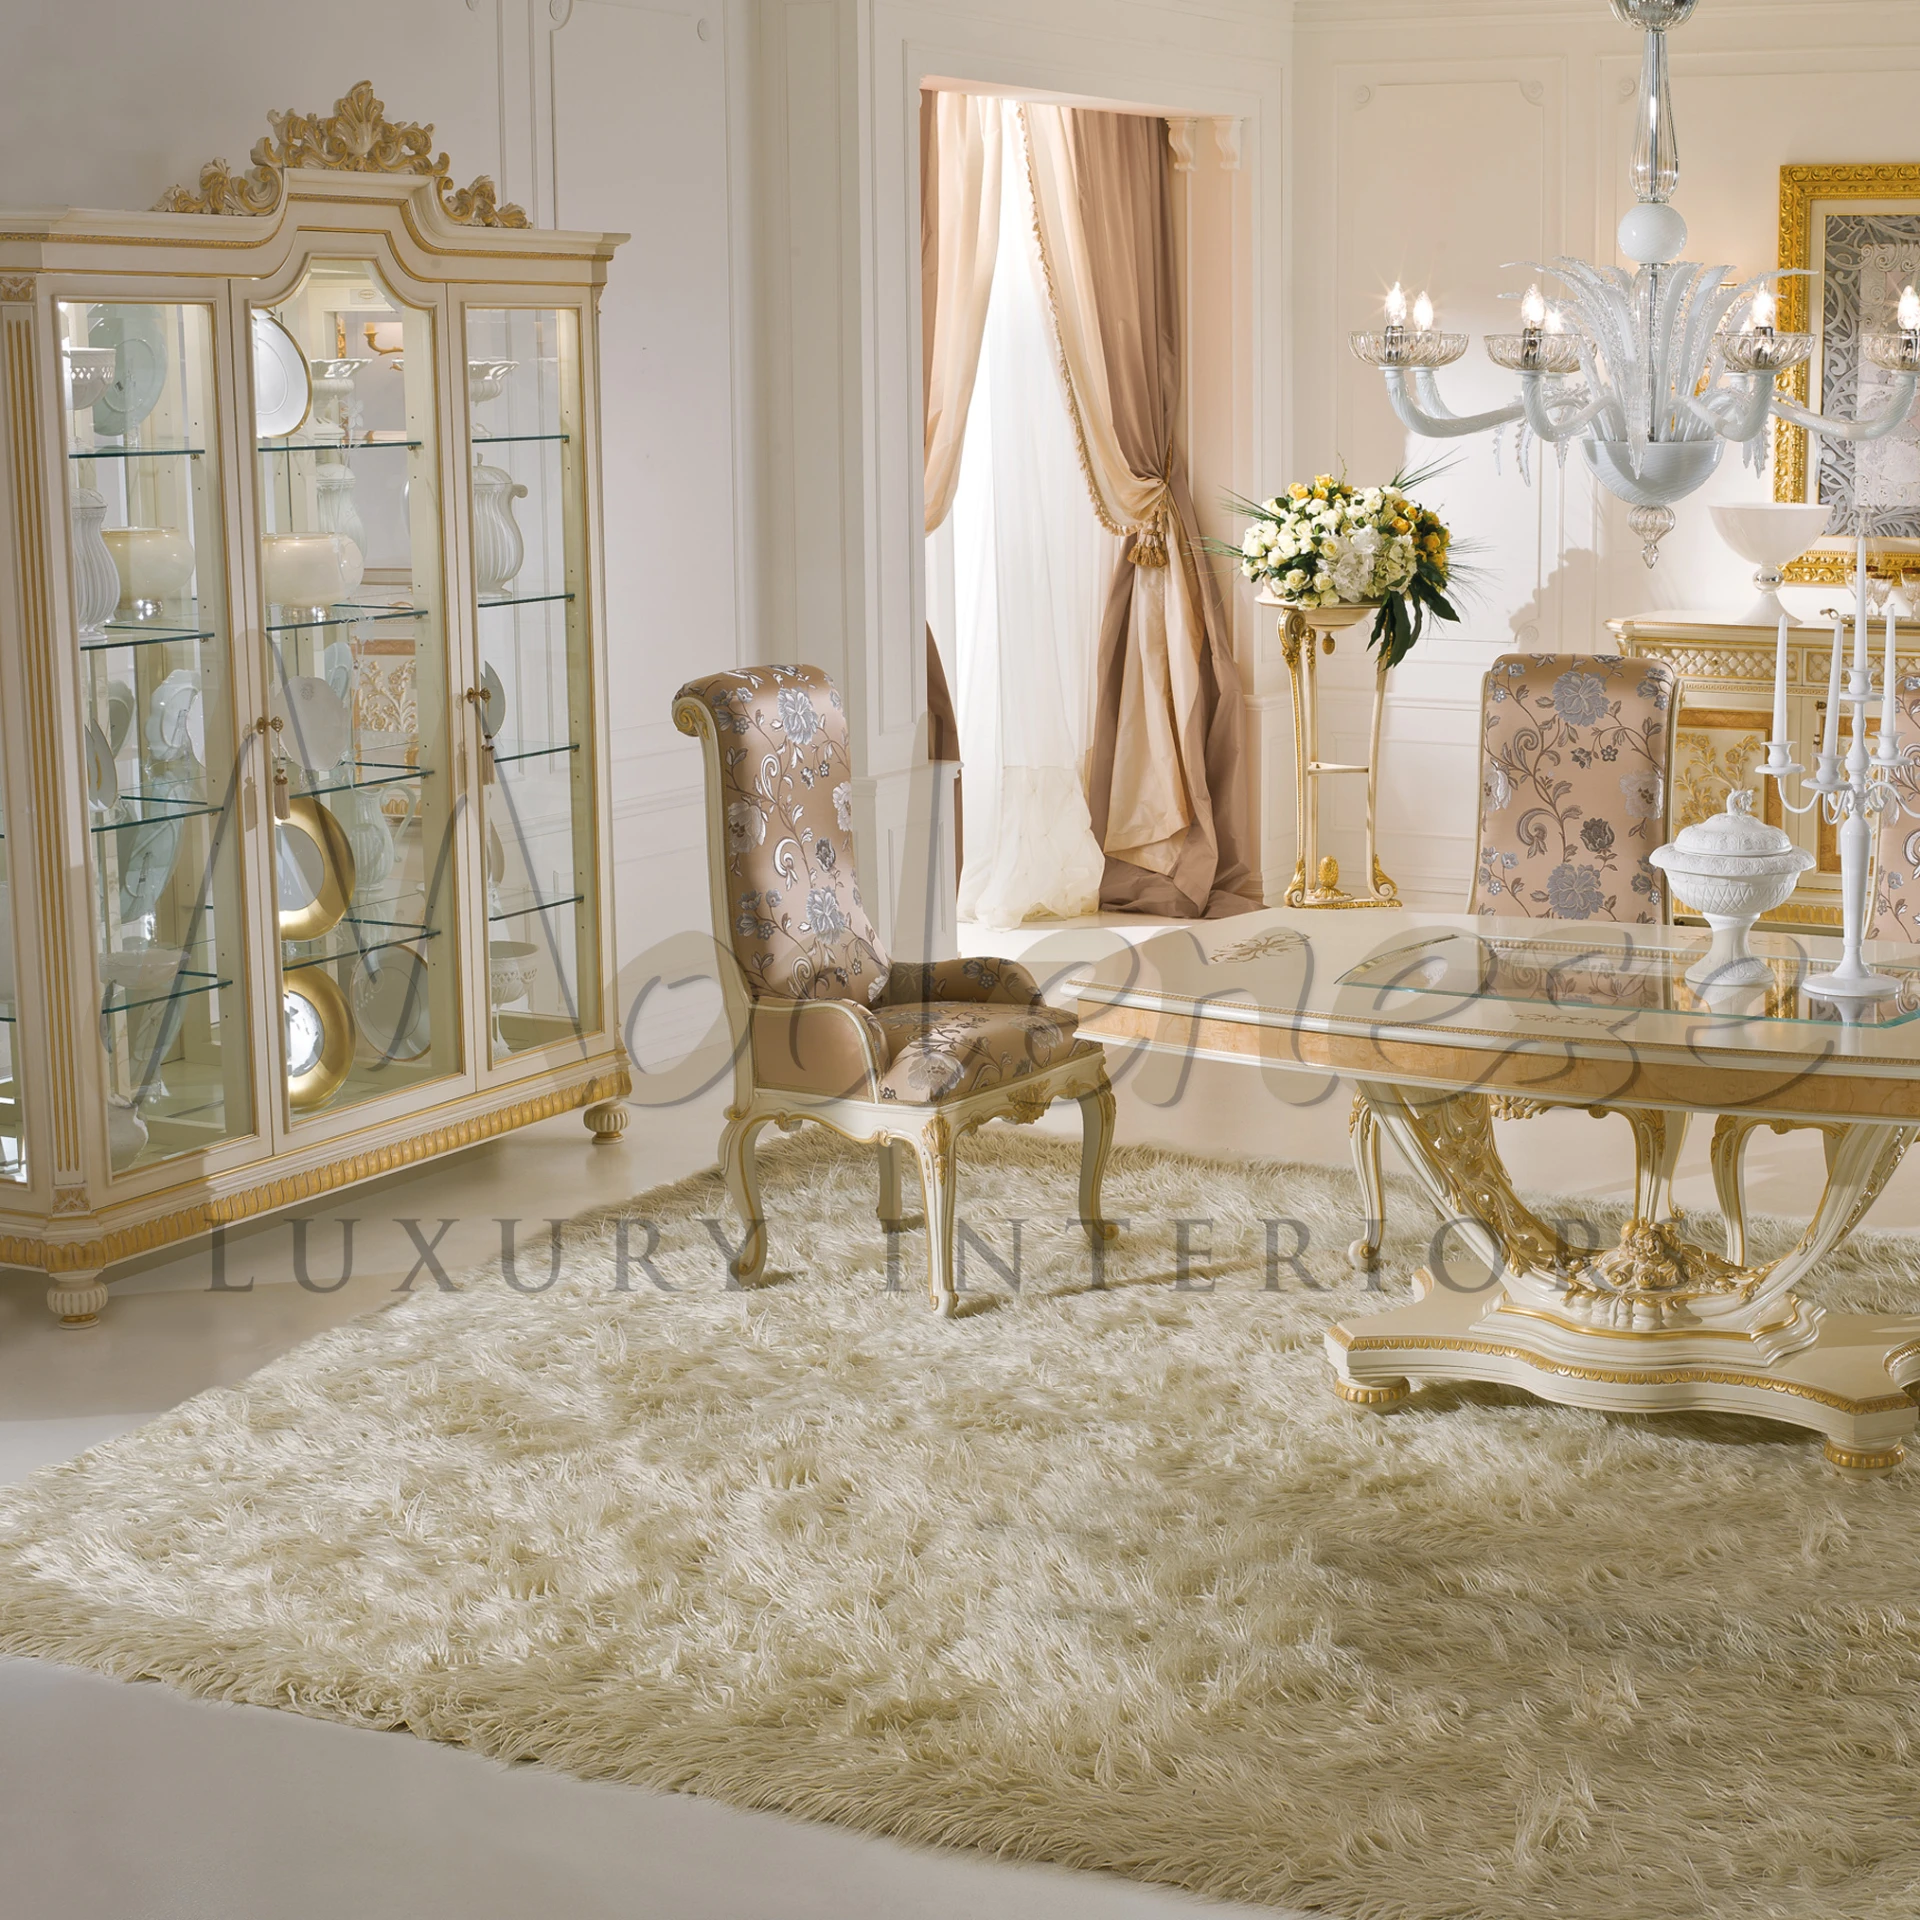 A fancy dining room with a cabinet with glass doors, a fancy table, a chair with patterns.